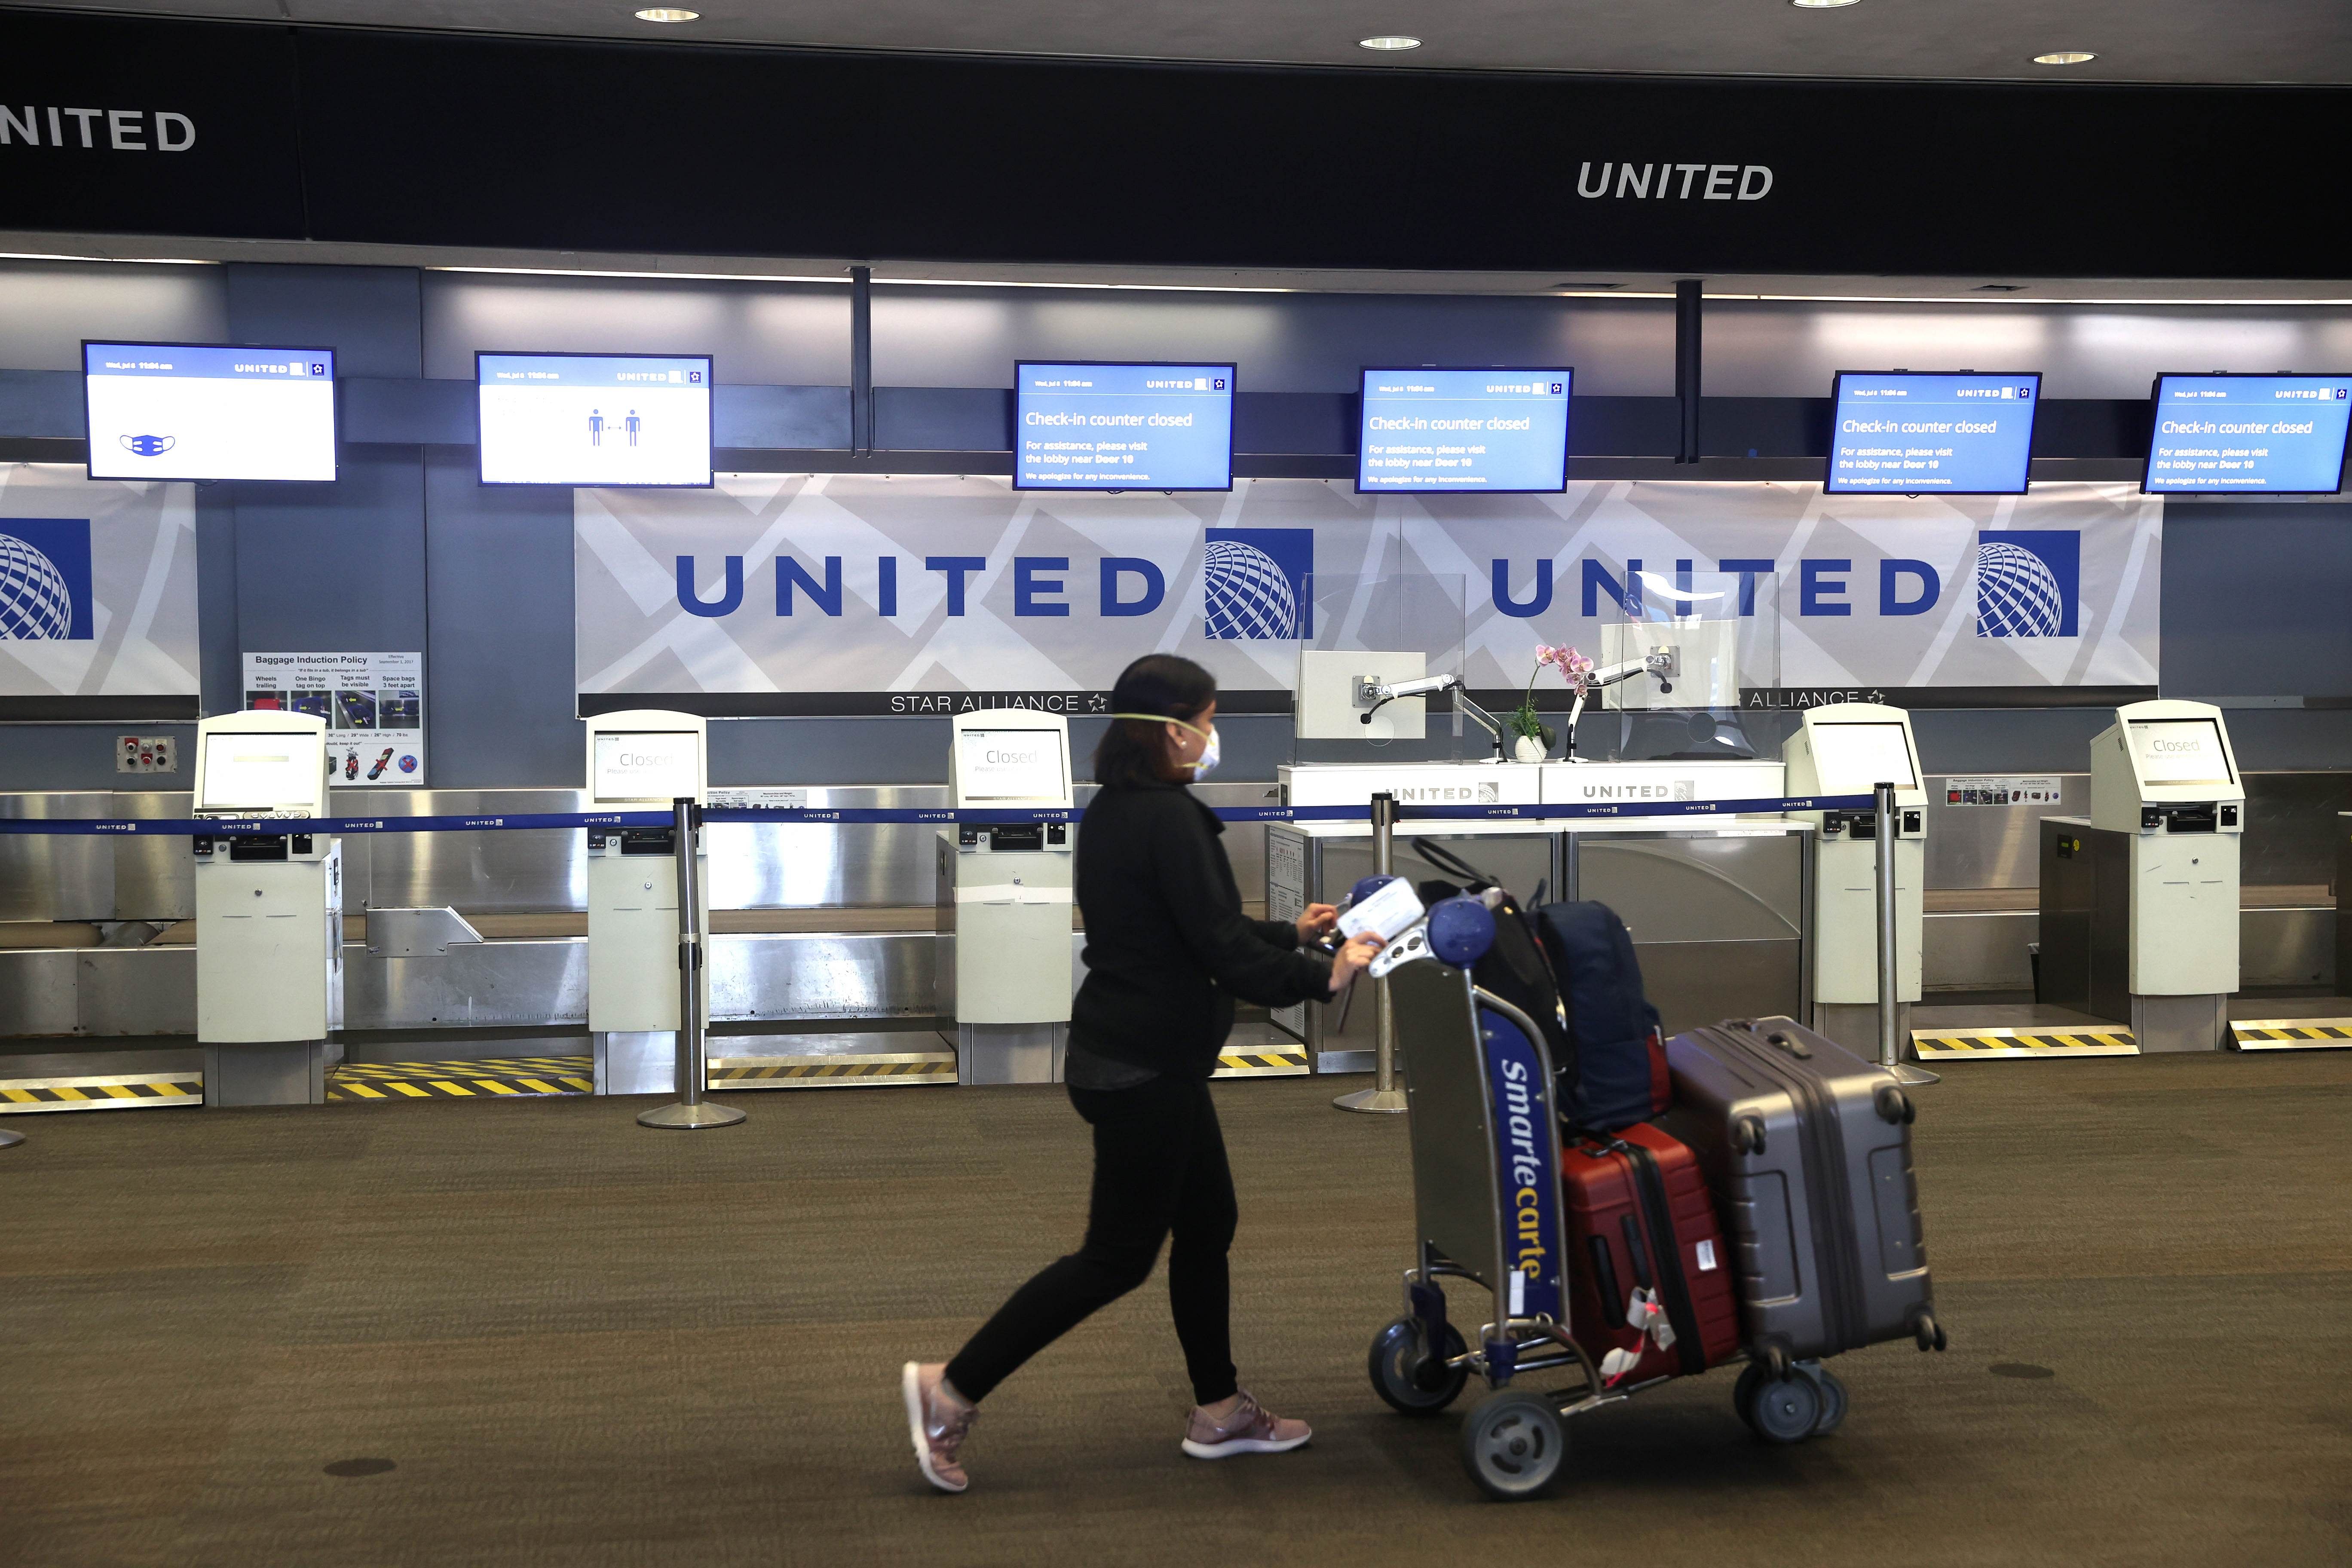 A United Airlines passenger pushes a luggage cart past closed check-in kiosks at San Francisco International Airport. Credits: AFP Photo